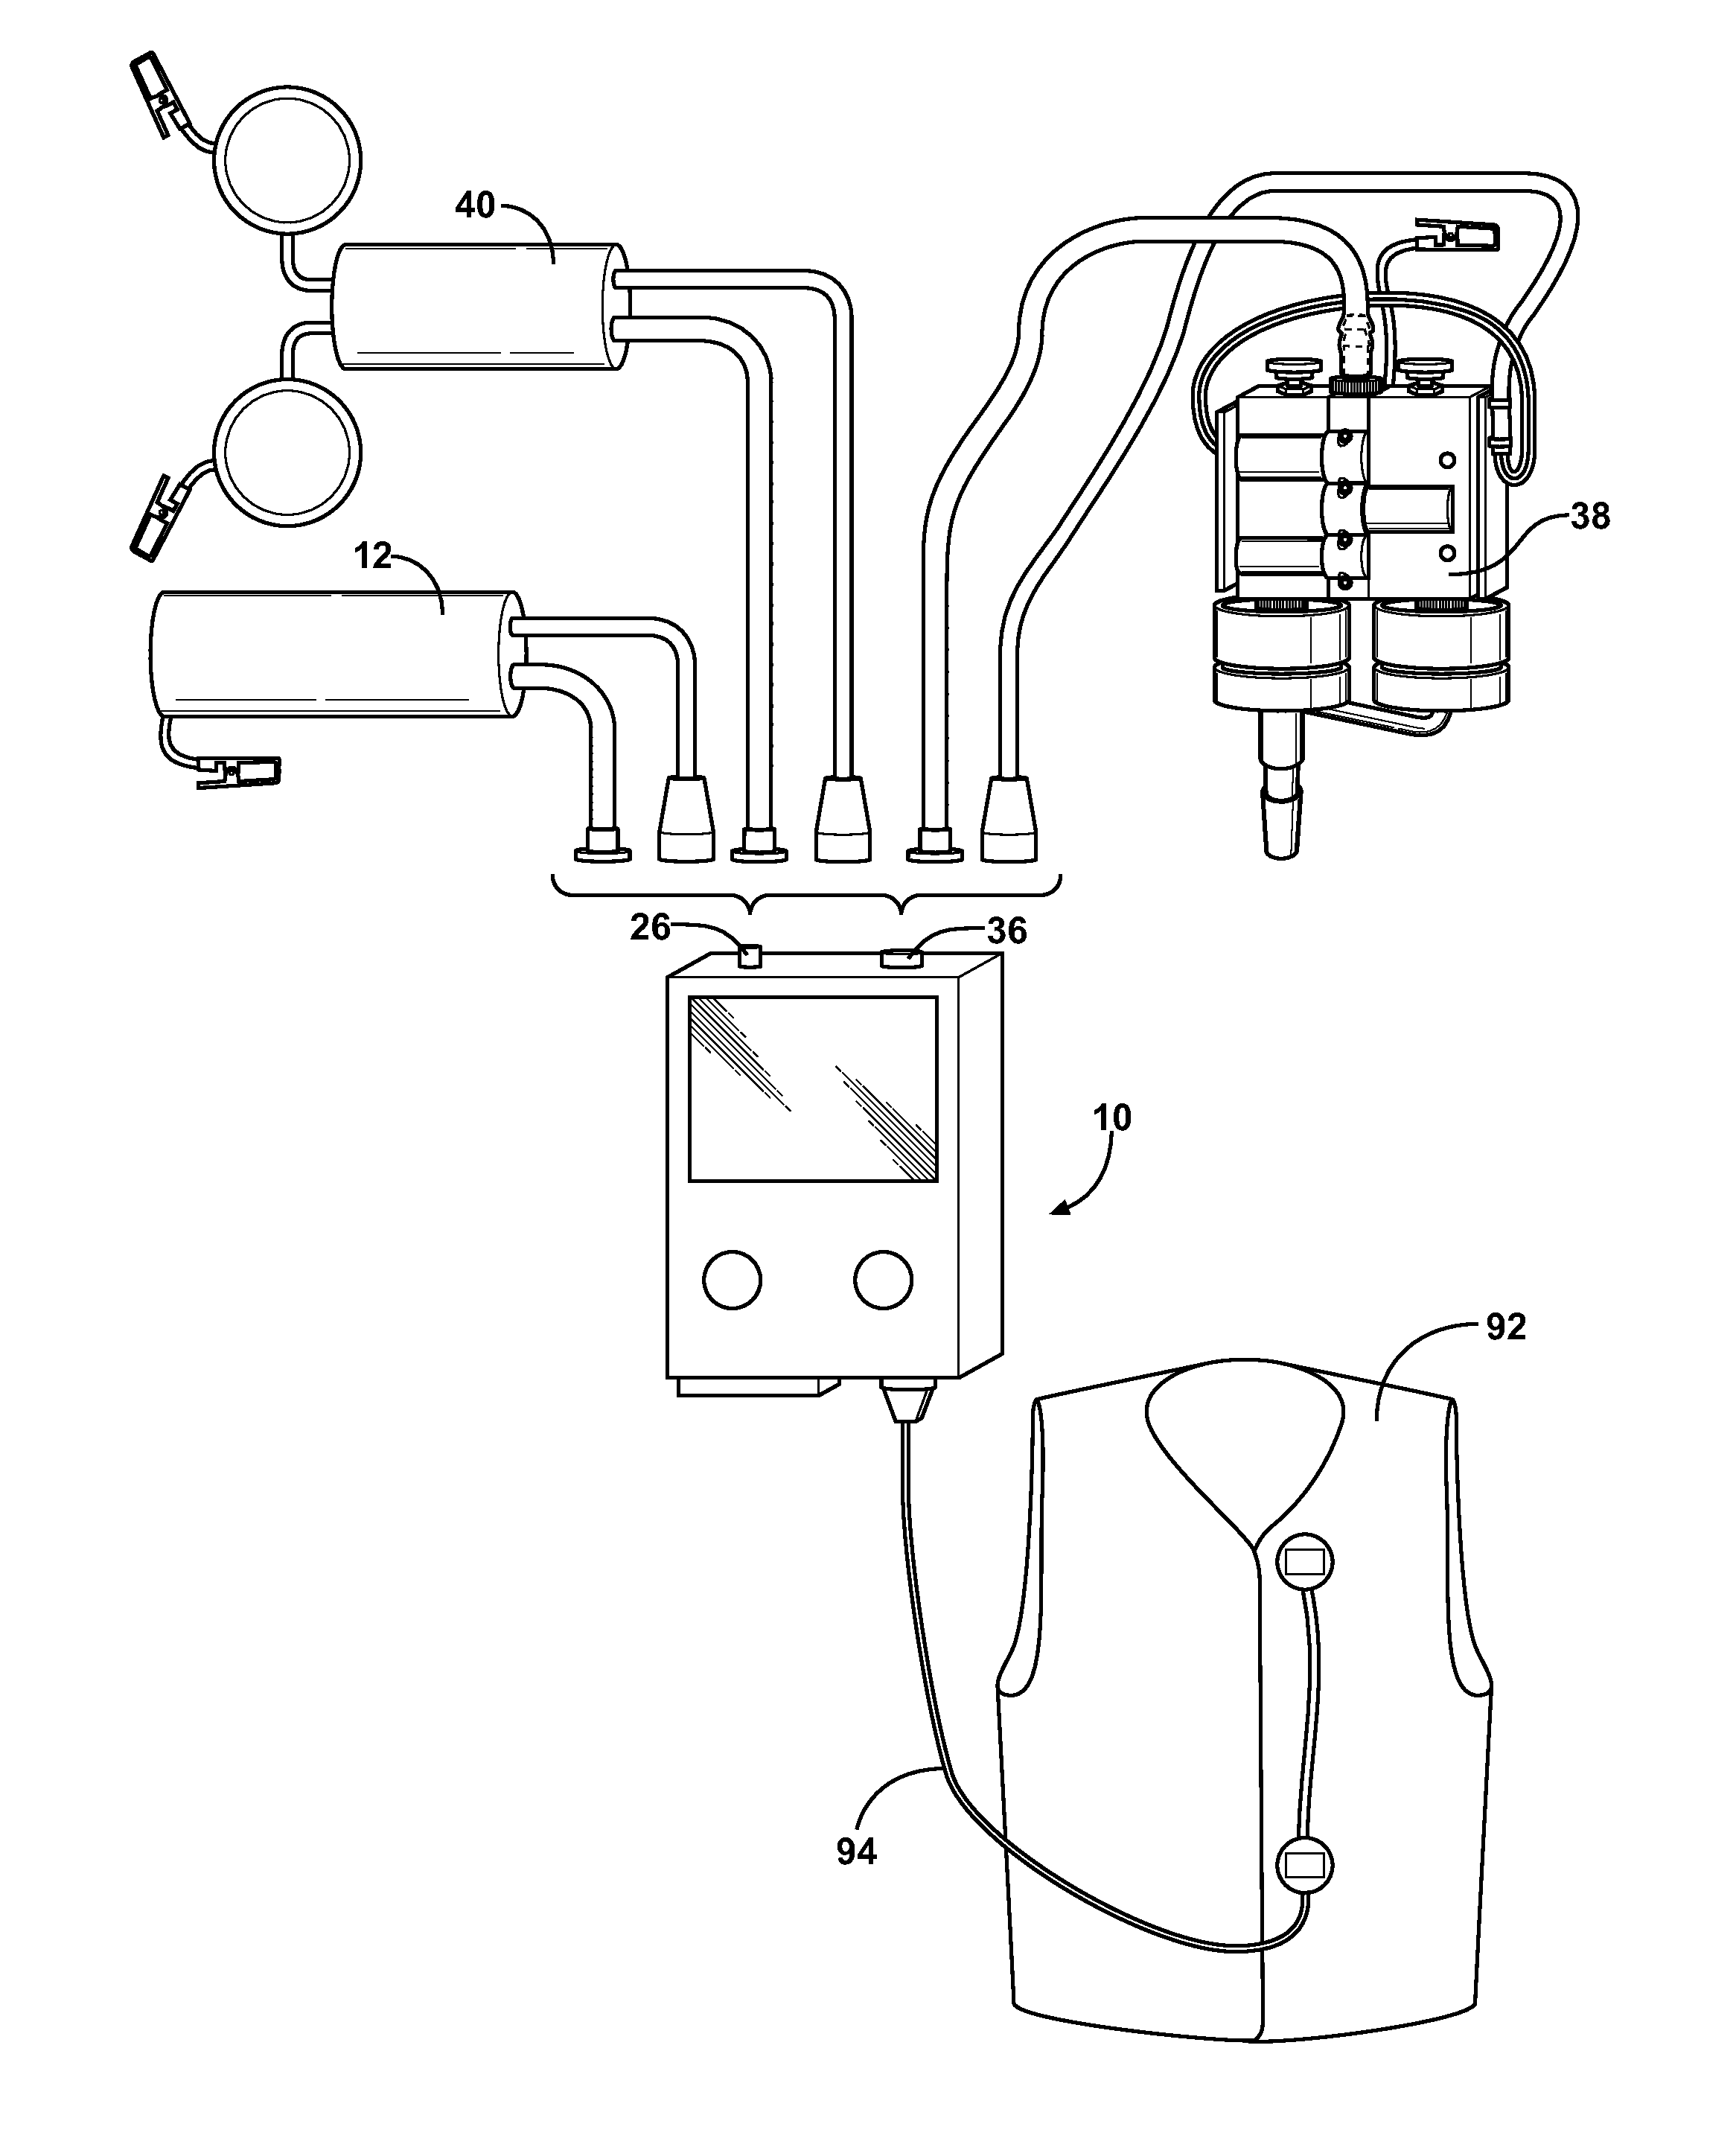 Universal physiologic sampling pump (PSP) capable of rapid response to breathing